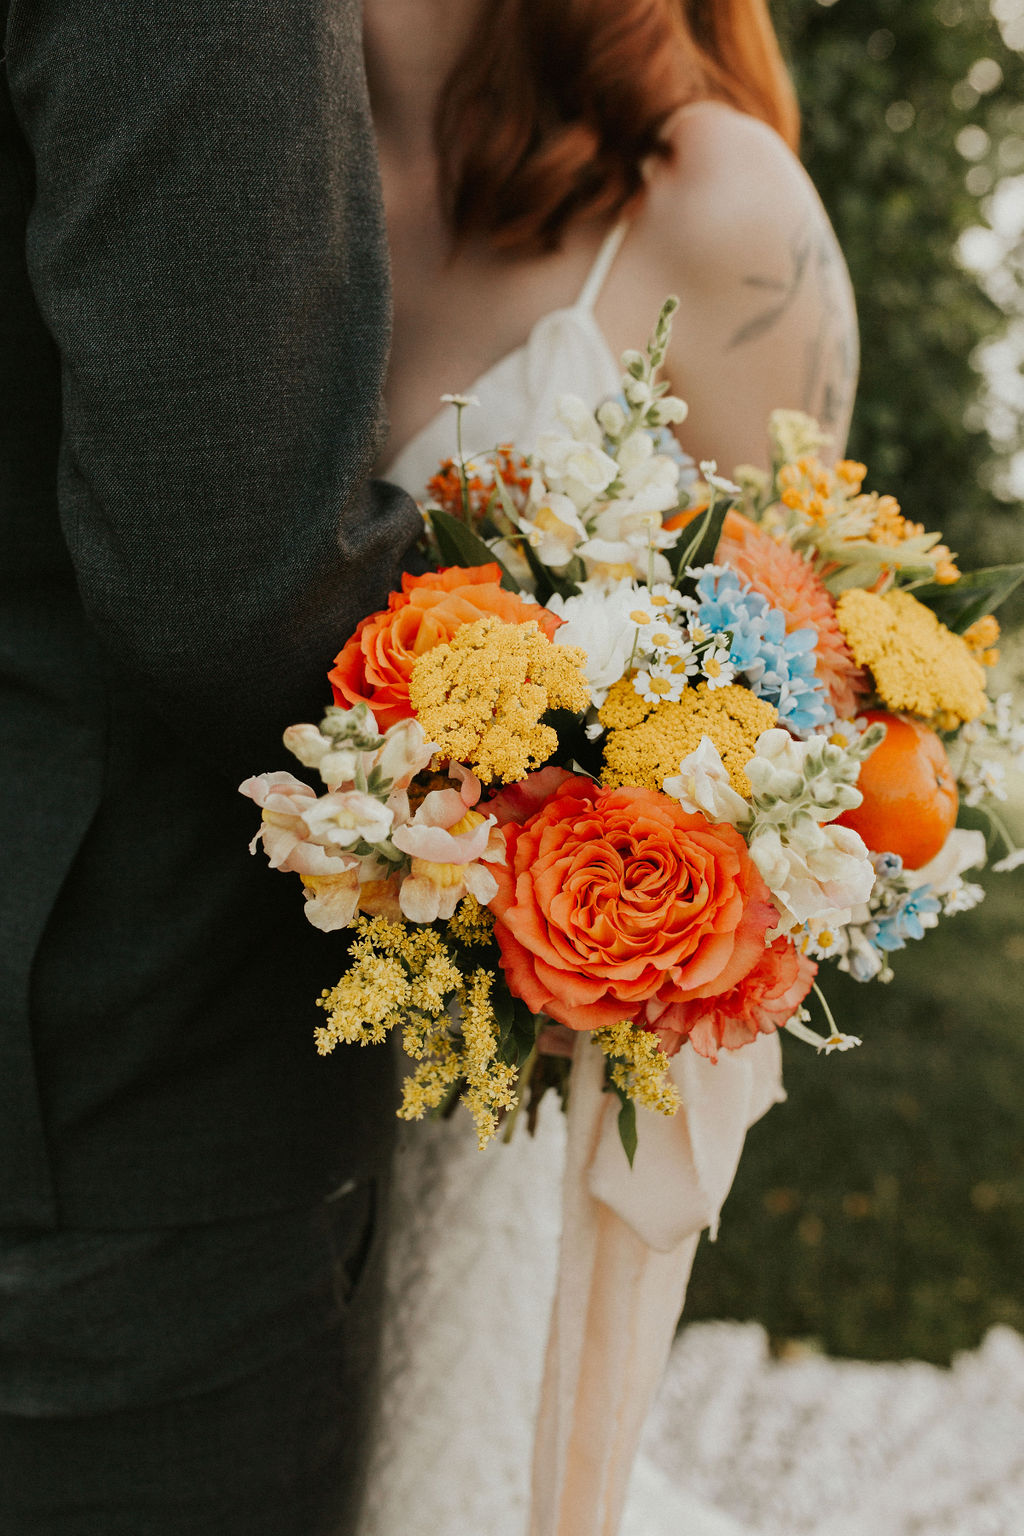 Bold summer wedding bouquet with tangerine, yellow, orange, and peach hues with a dash of blue